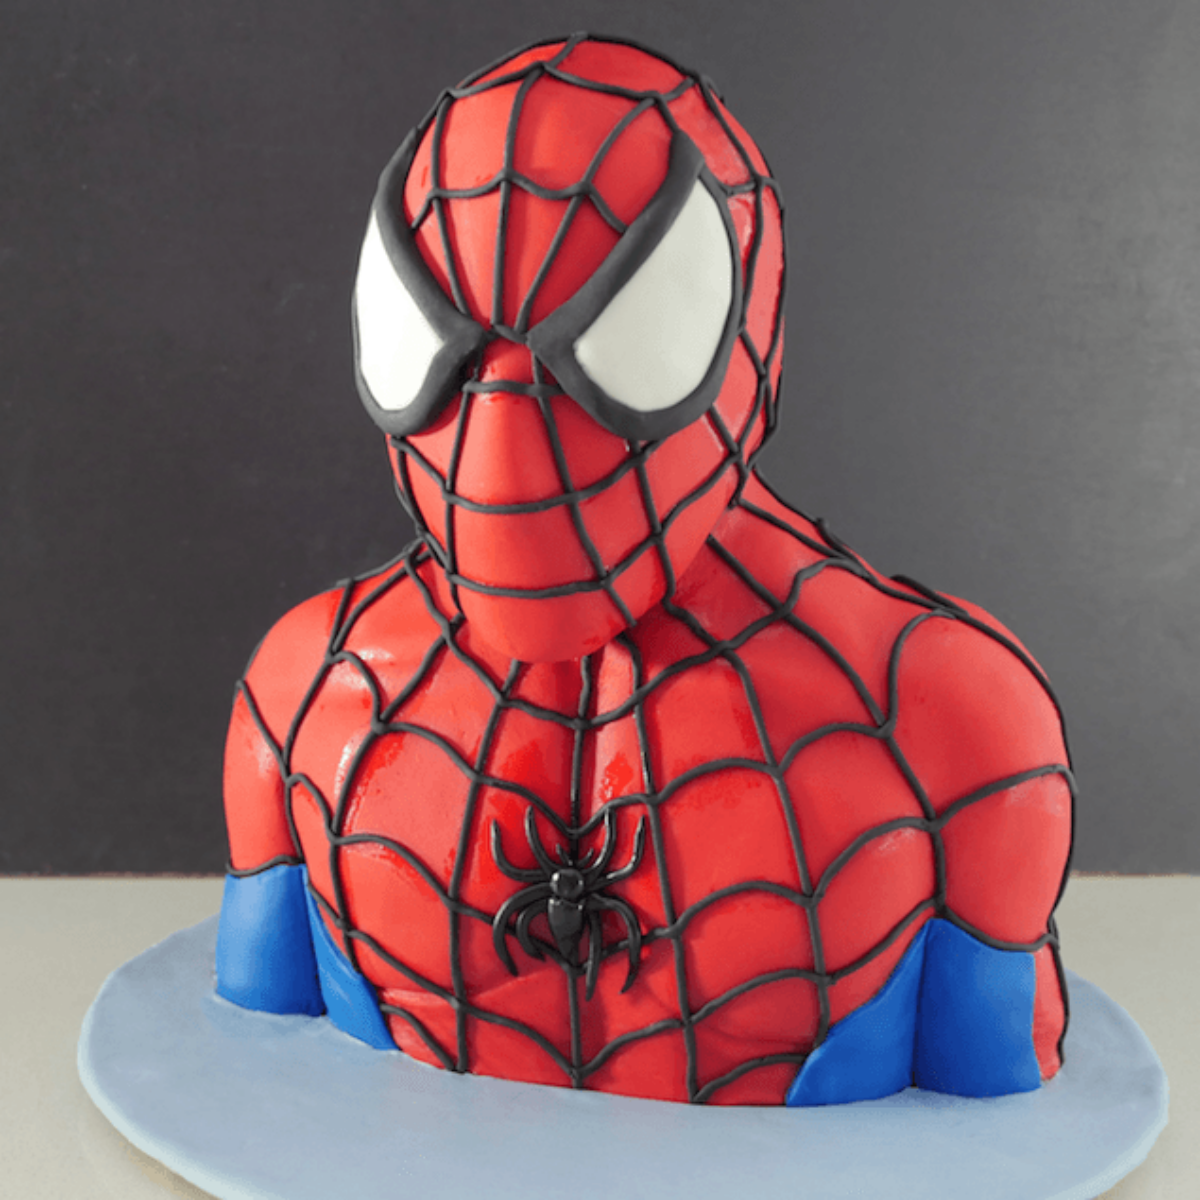 HowToCookThat : Cakes, Dessert & Chocolate | 3D Spiderman Cake Tutorial -  HowToCookThat : Cakes, Dessert & Chocolate